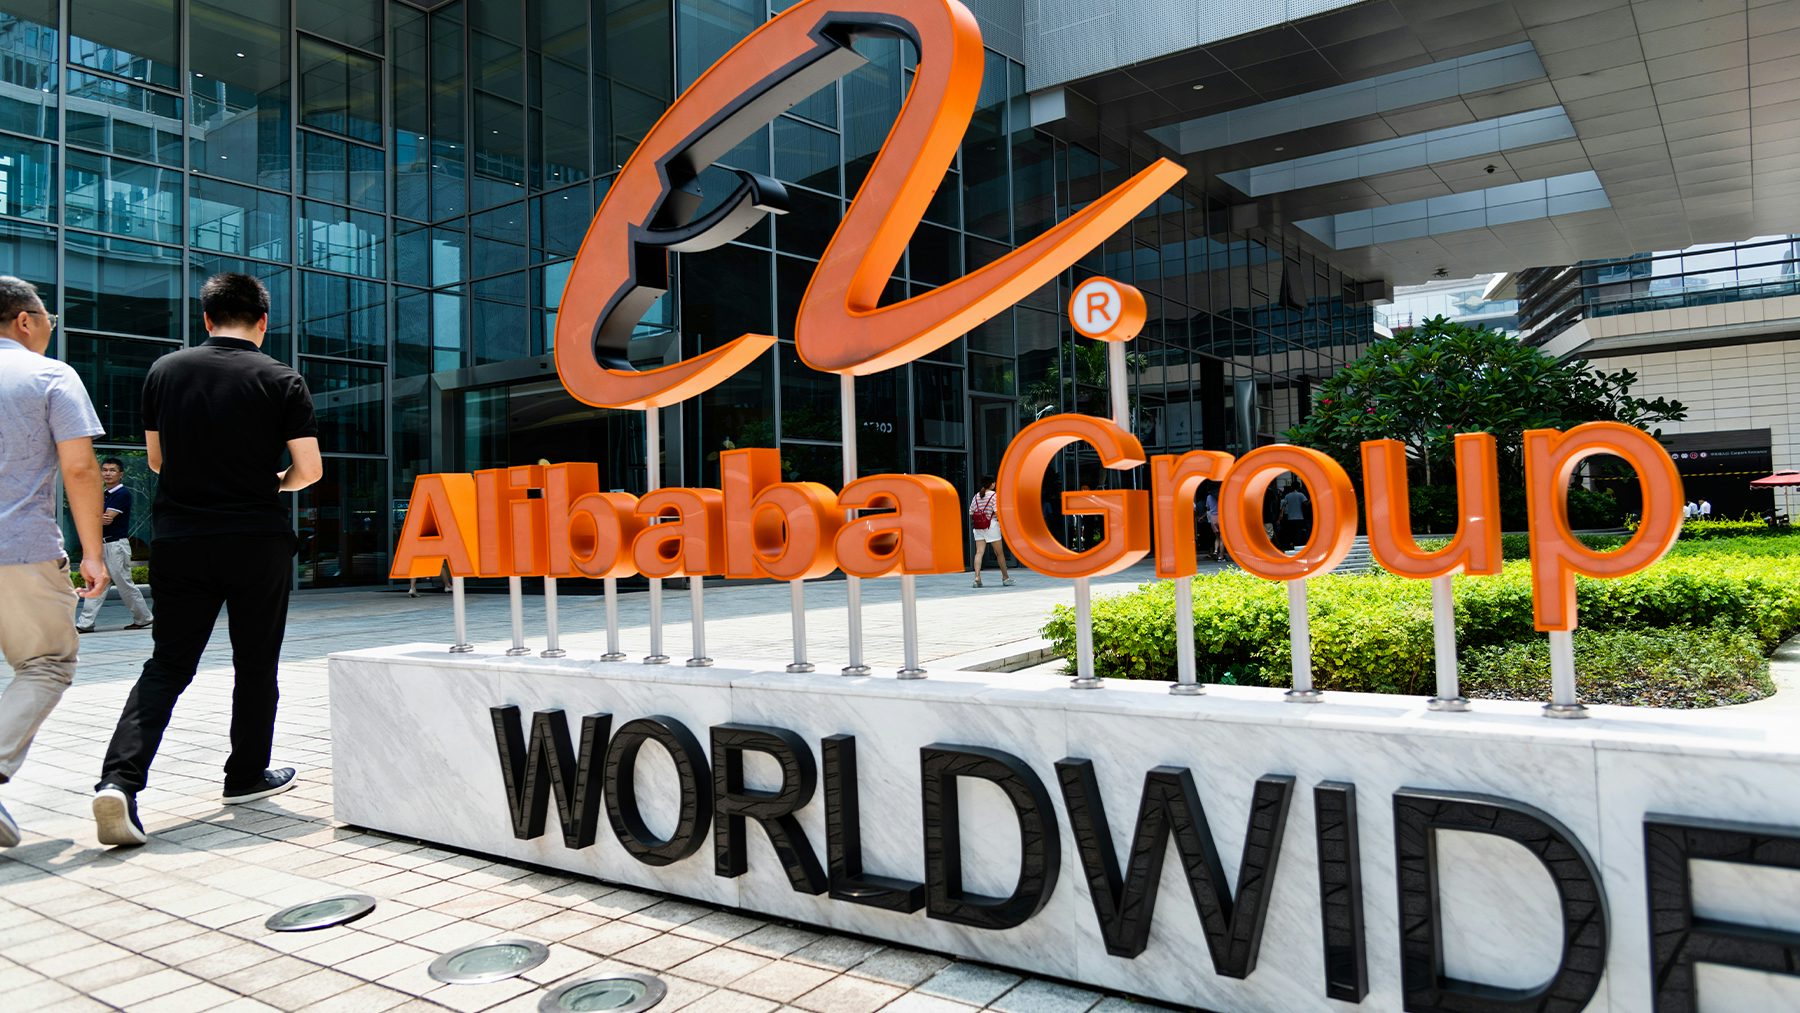 Alibaba is among the tech companies caught up in a new round of fines levied by Chinese regulators. Shutterstock.